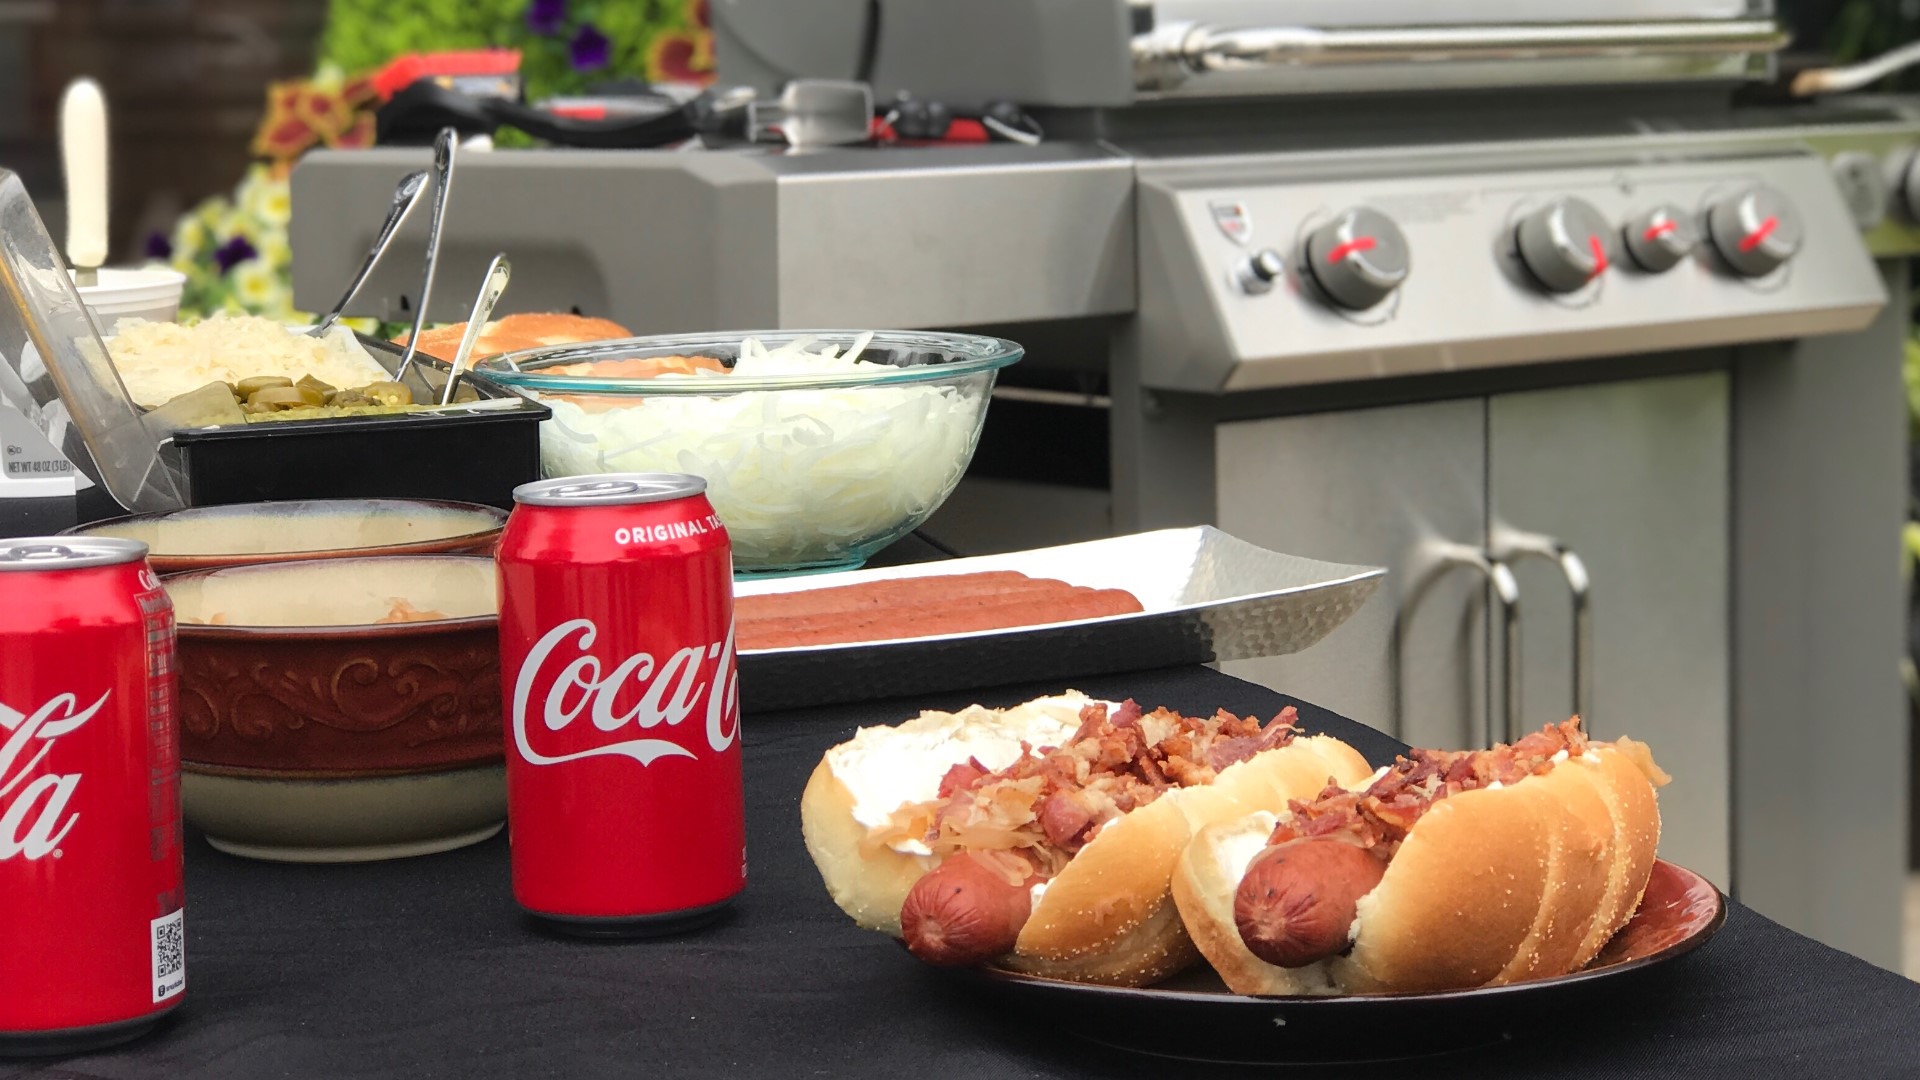 Summertime and the grilling's easy! The right equipment makes all the difference when firing up your backyard grill. Sponsored by Lowe's Home Improvement.